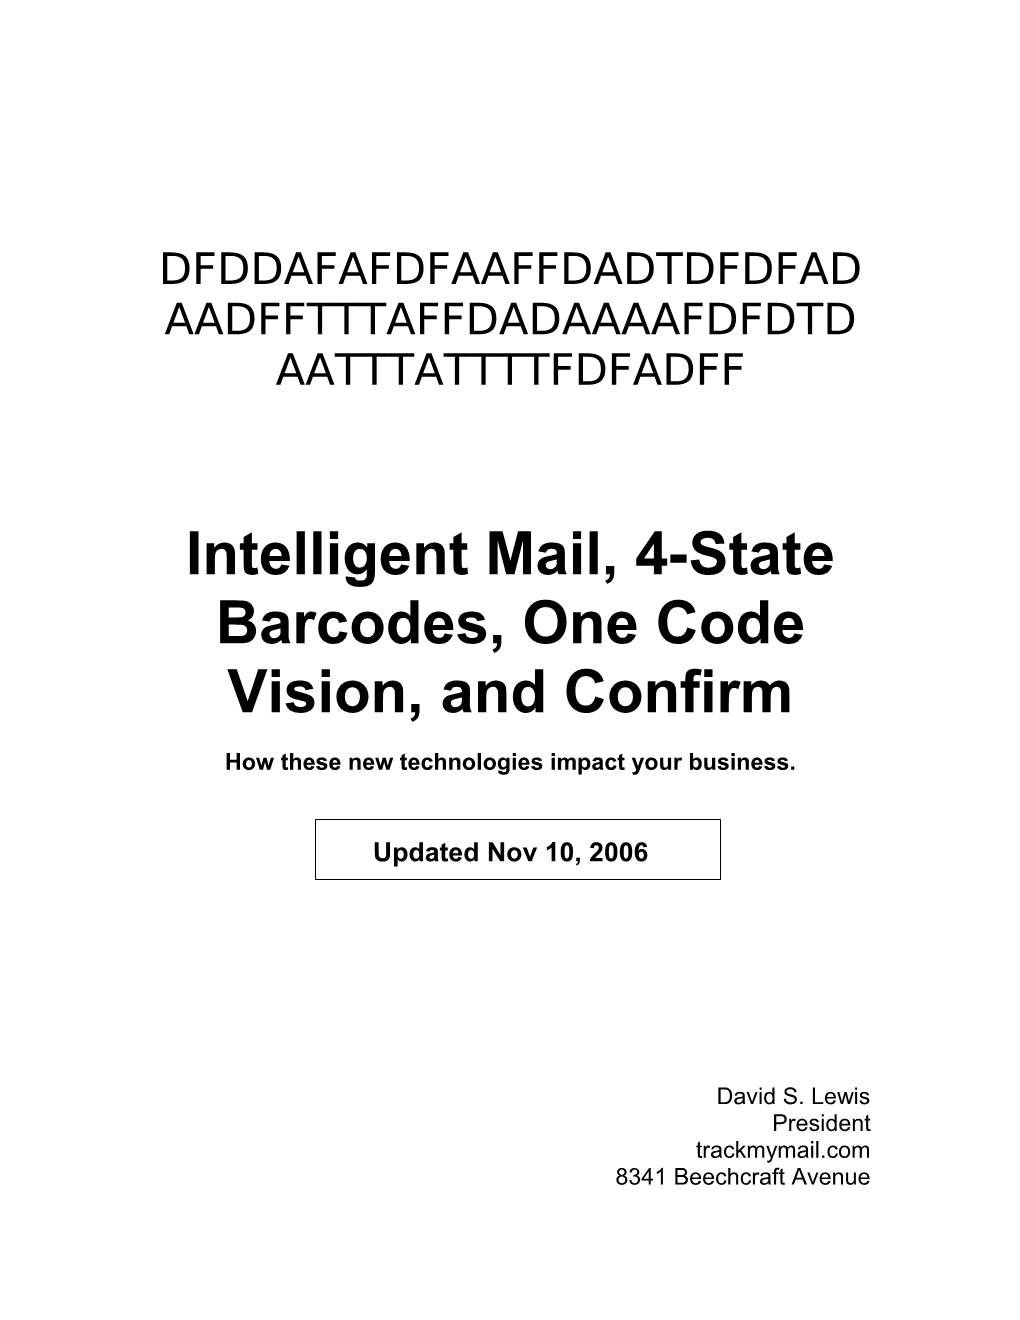 Intelligent Mail, 4-State Barcodes, One Code Vision, and Confirm